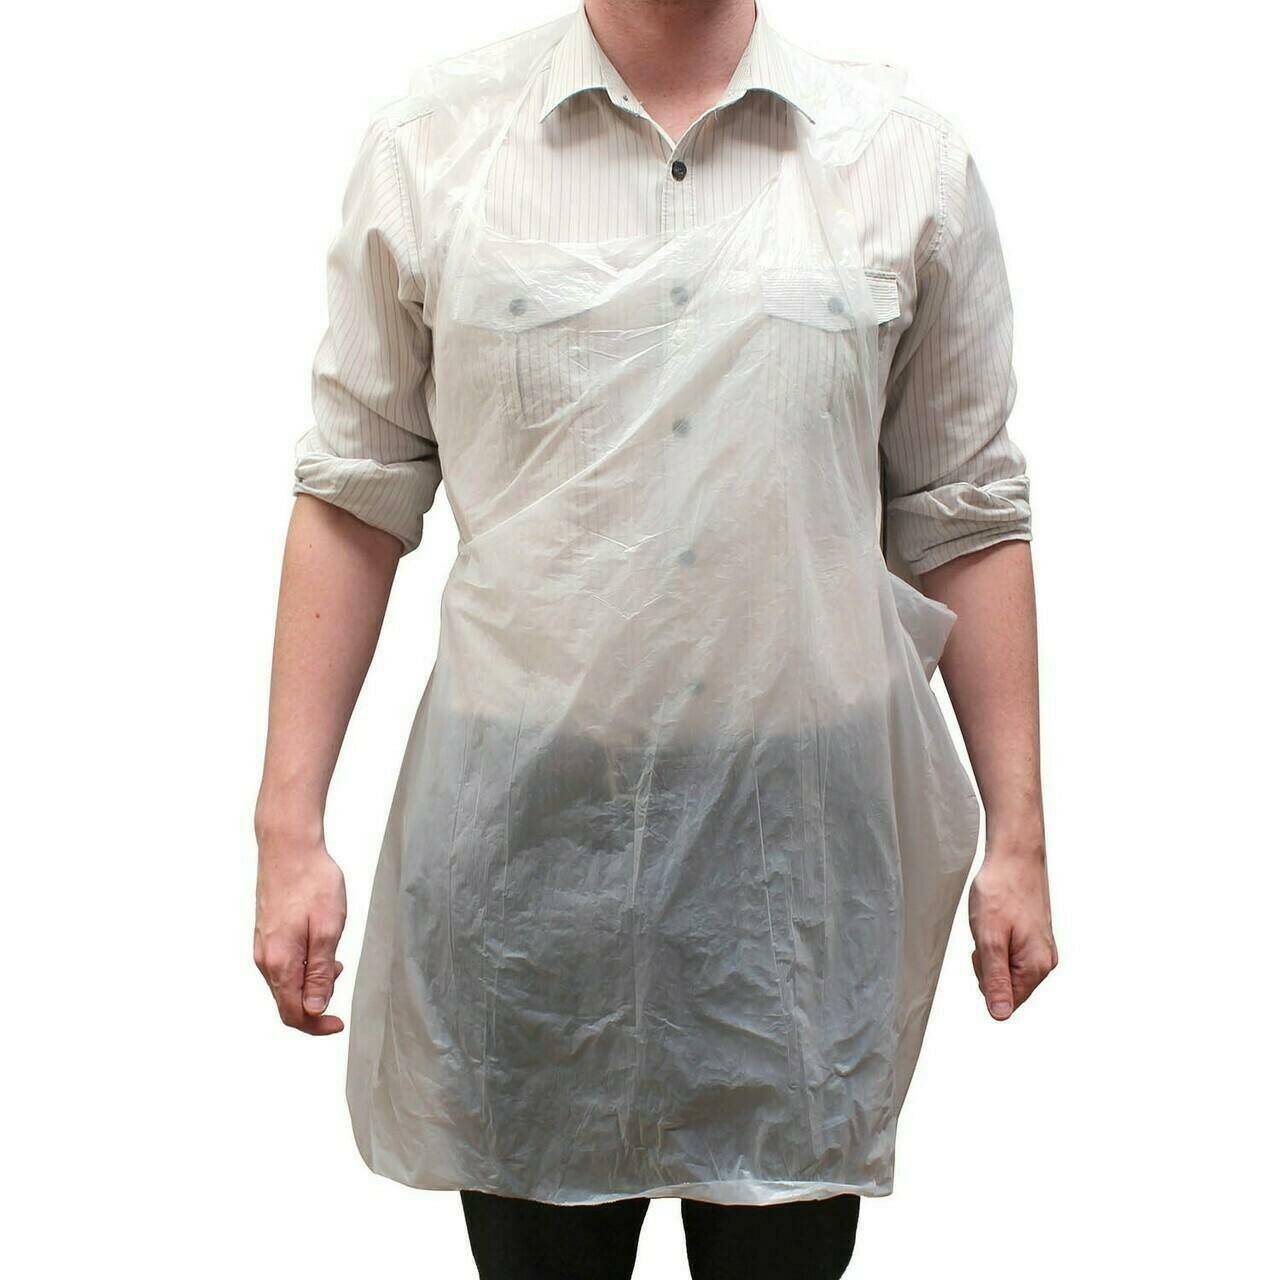 200 White Disposable Aprons - Roll